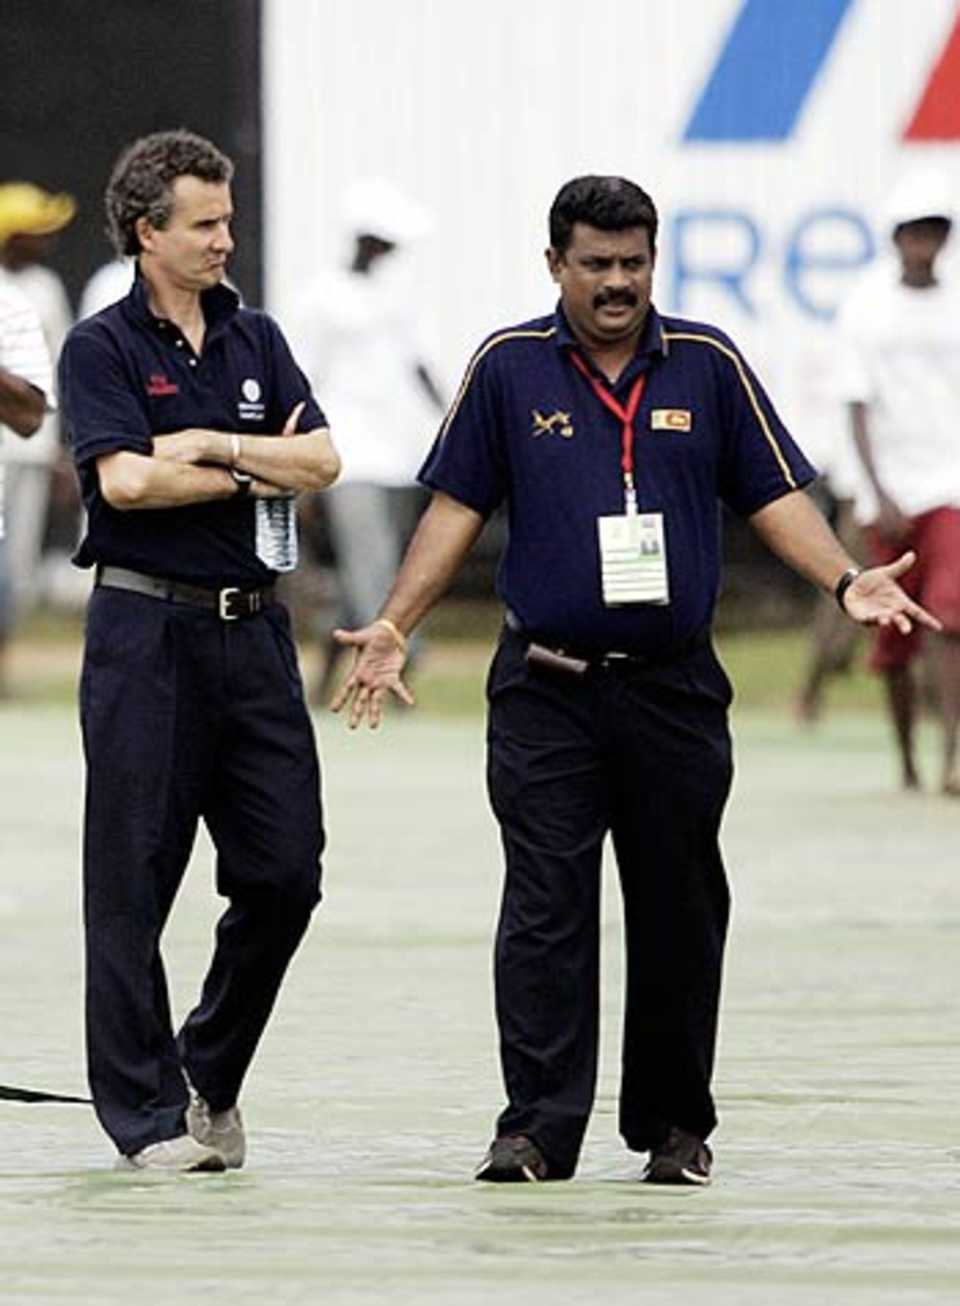 Billy Bowden does an inspection along with an official at the Sinhalese Sports Club, Sri Lanka v India, 2nd ODI, August 20, 2006